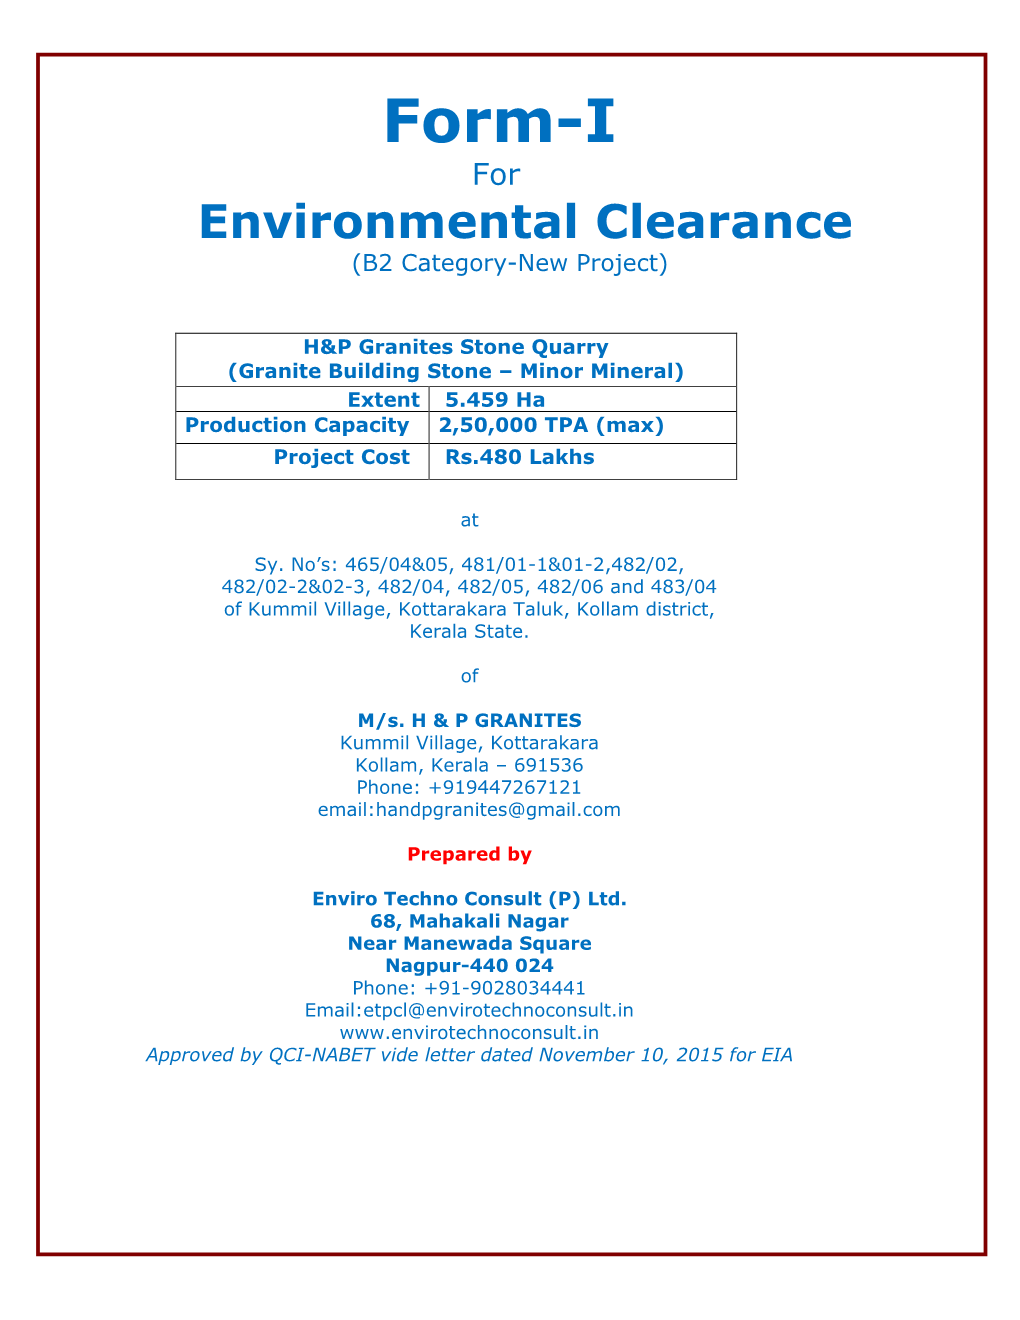 Form-I for Environmental Clearance (B2 Category-New Project)